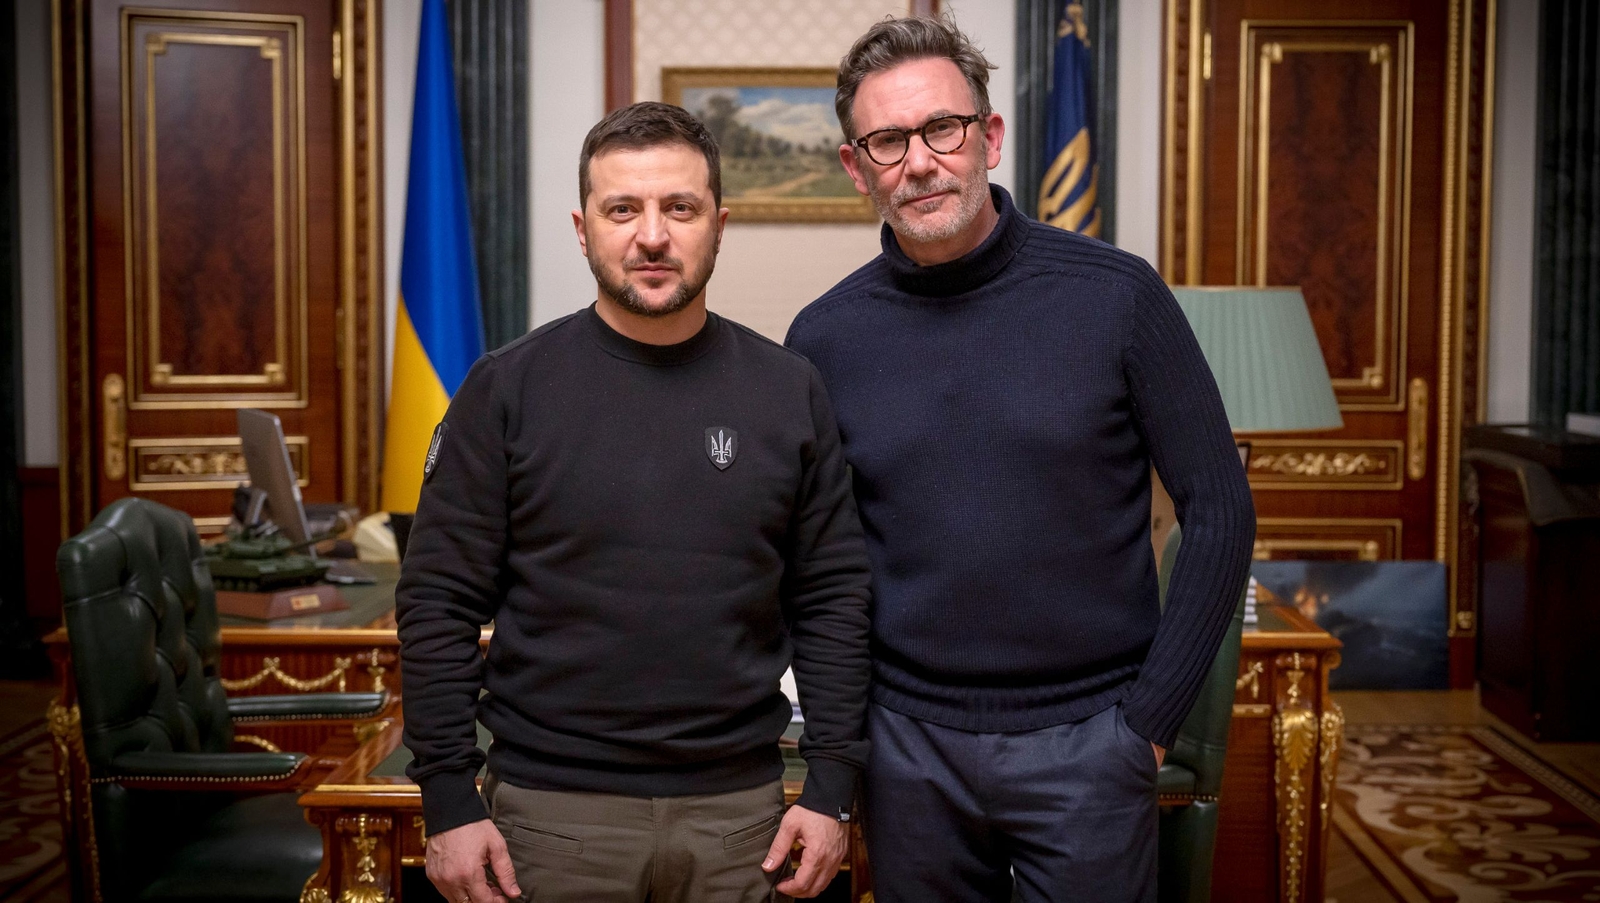 UNITED24 Welcomes a New Ambassador: Oscar-Winning Director, Michel Hazanavicius, Visits Kyiv, Joins the Platform, and Will Support the Rebuilding Ukraine Program